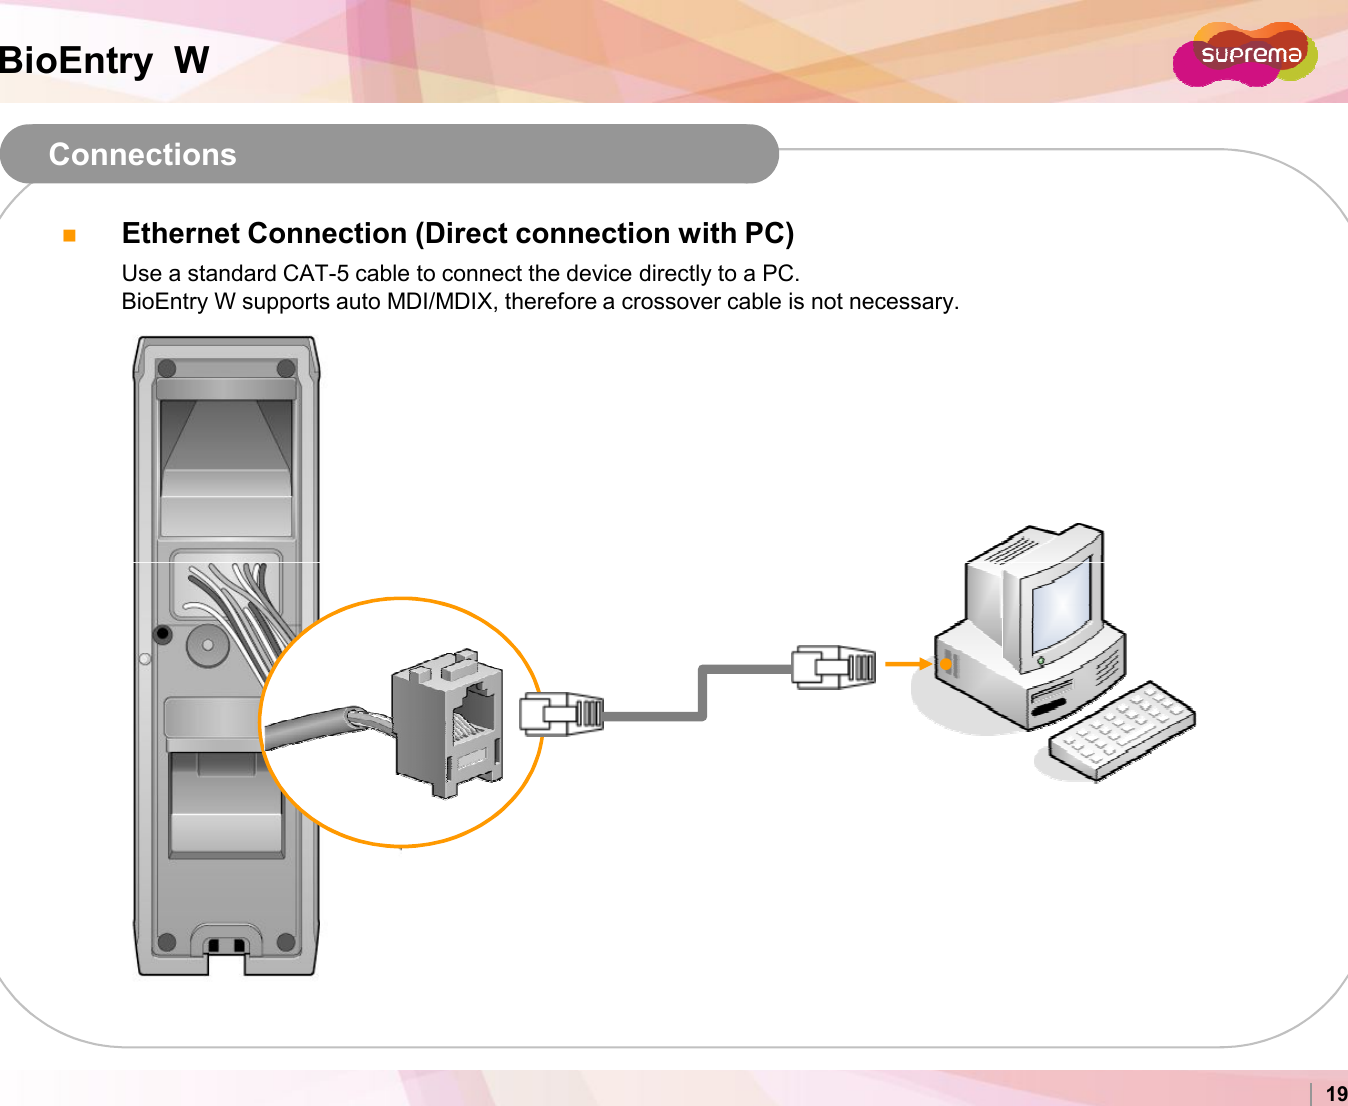 BioEntry  WConnectionsEthernet Connection (Direct connection with PC)Use a standard CAT-5 cable to connect the device directly to a PC.BioEntry W supports auto MDI/MDIX, therefore a crossover cable is not necessary.Copyright 2007 Suprema Inc. 19